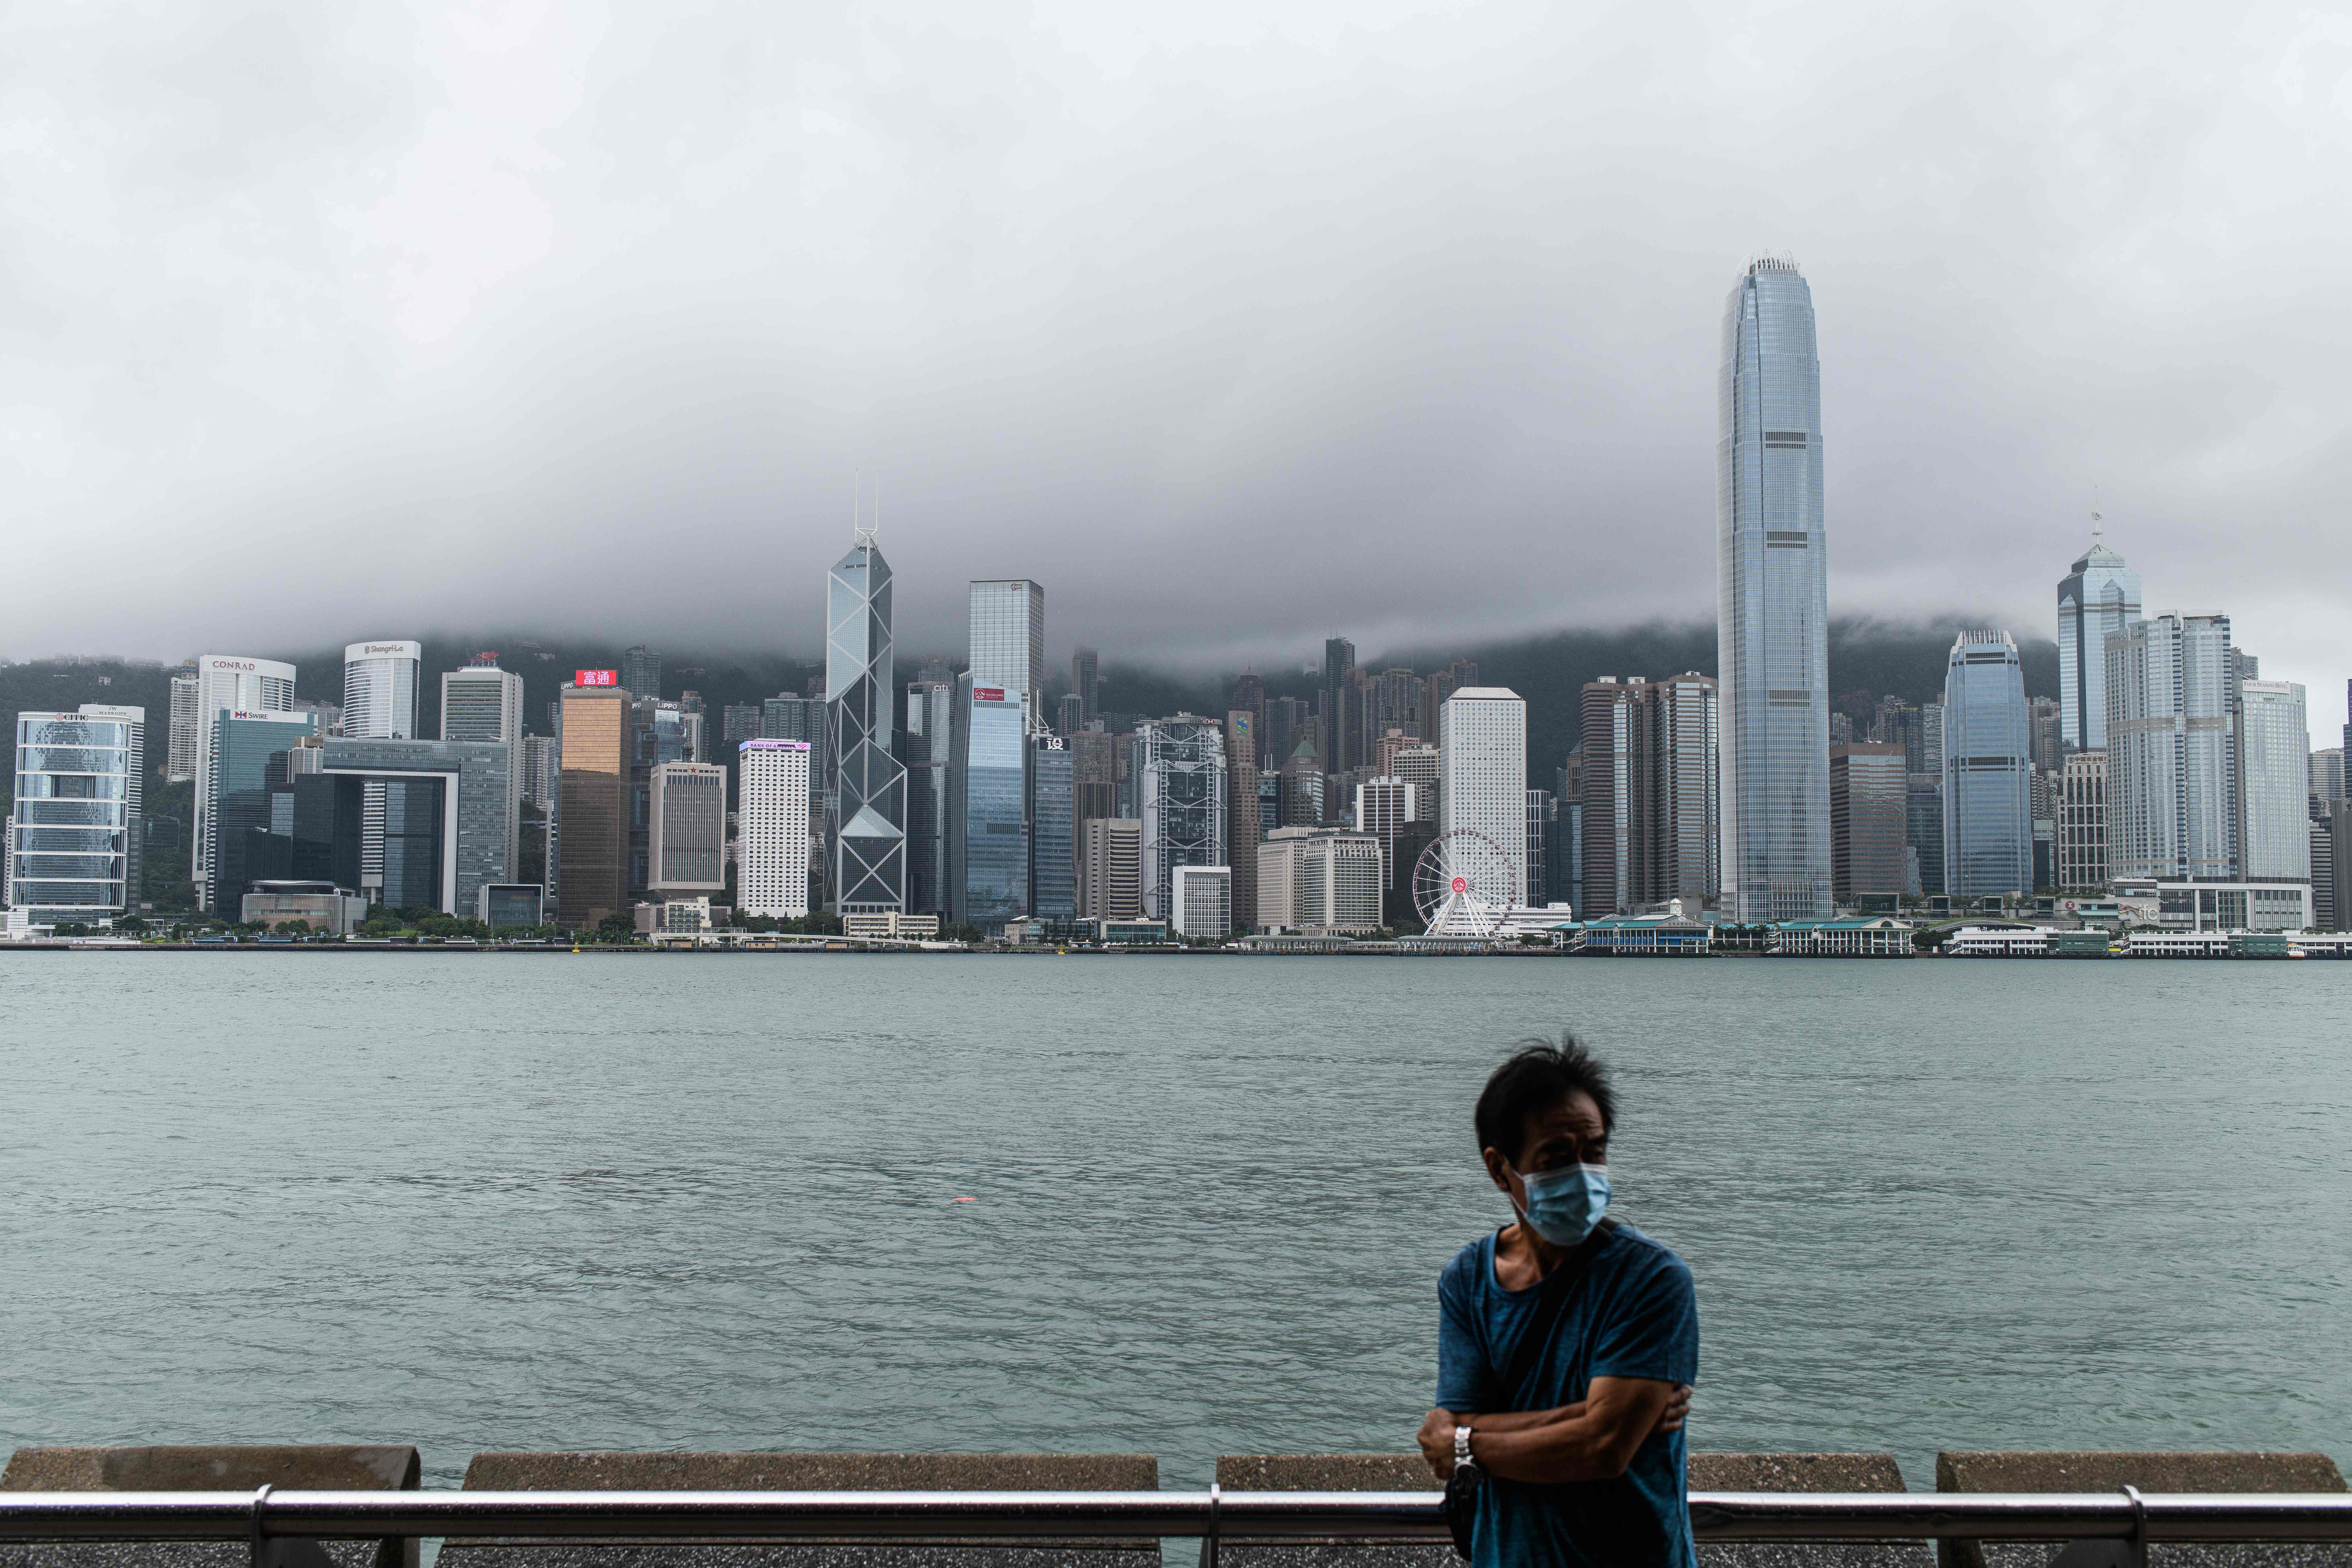 Hong Kong’s economy is not out of the woods despite sharp rebound, says commerce secretary